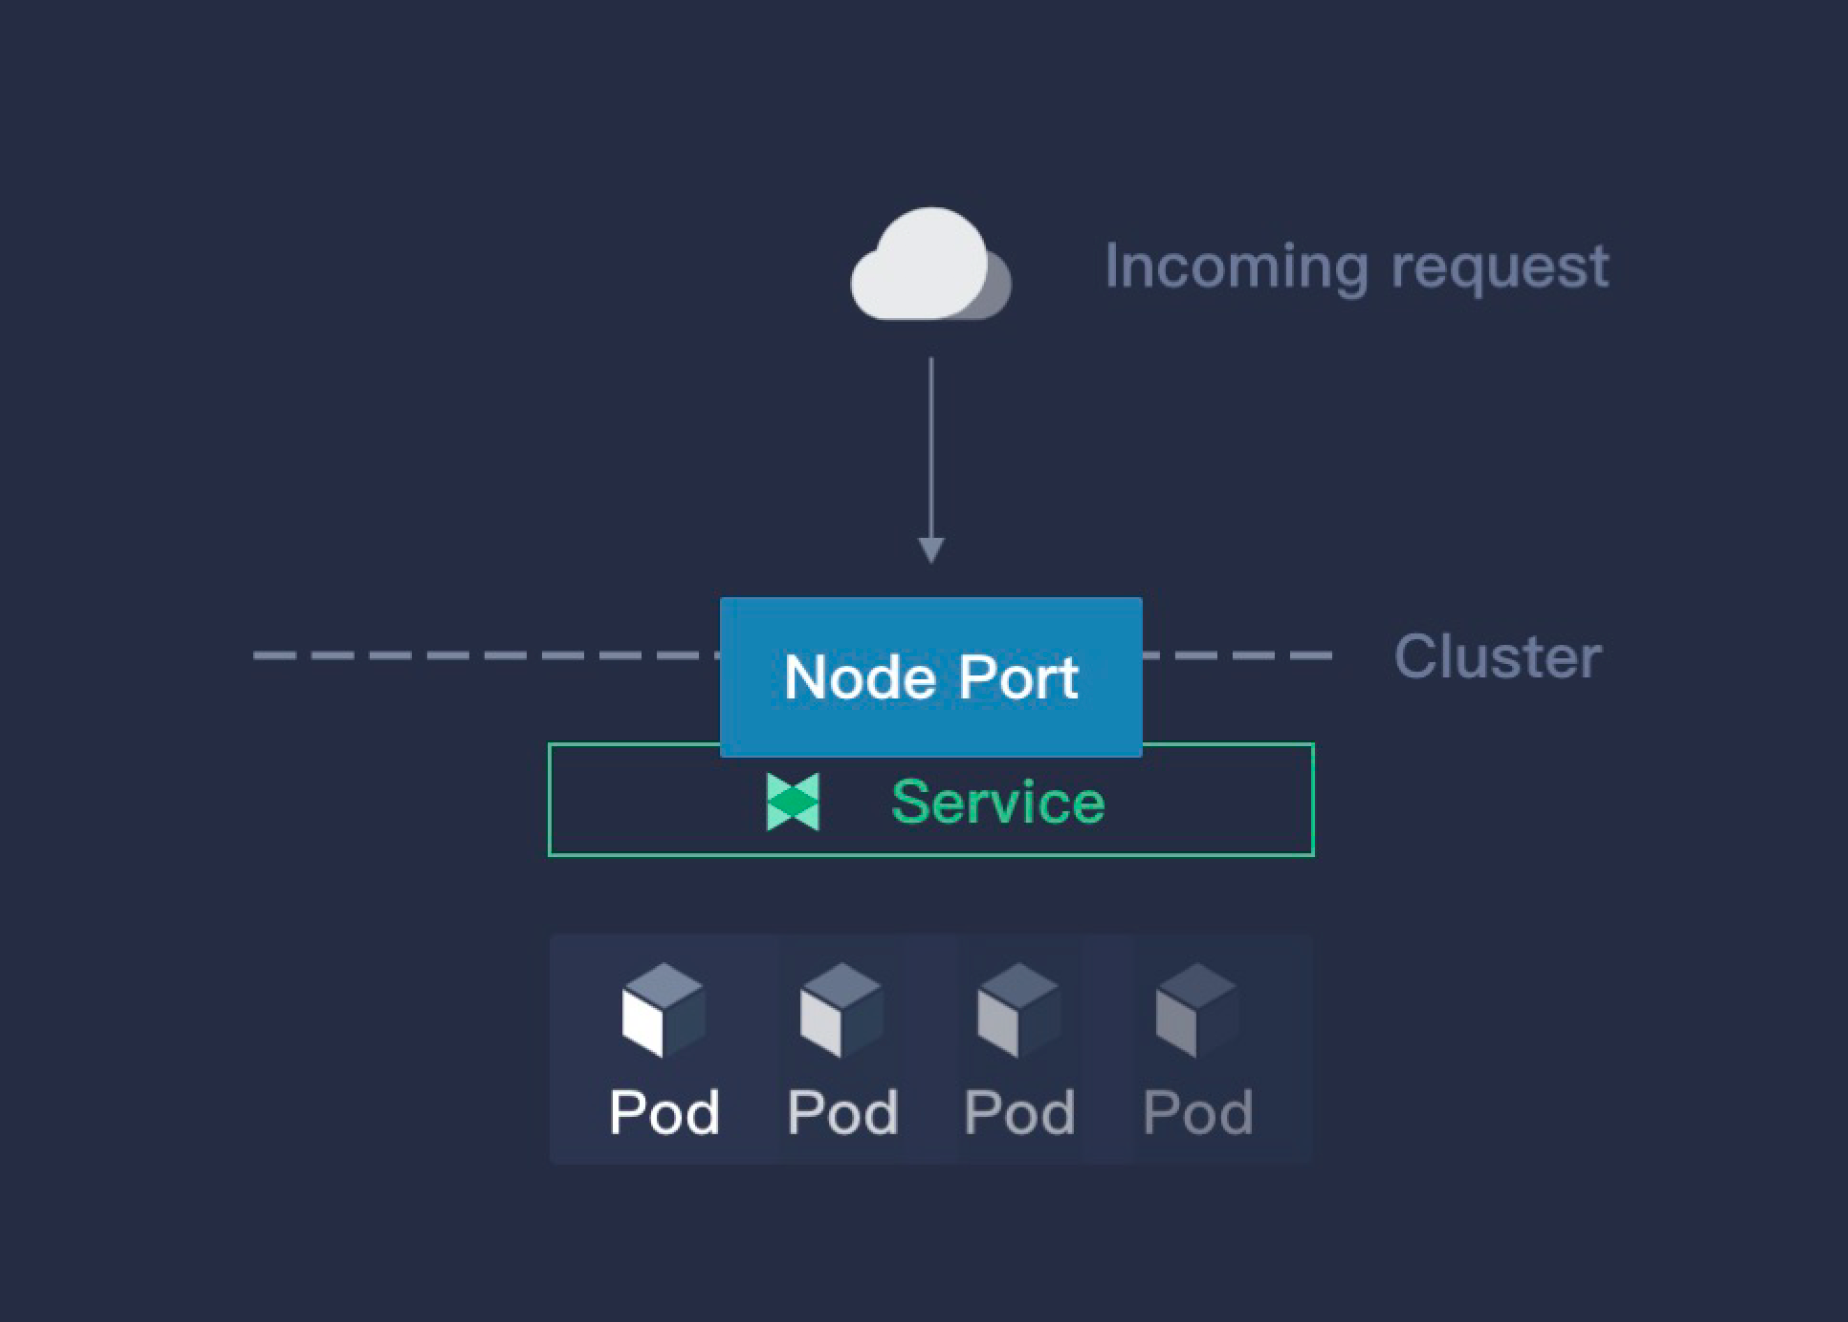 users can access the service through any node inthe cluster with the assigned port